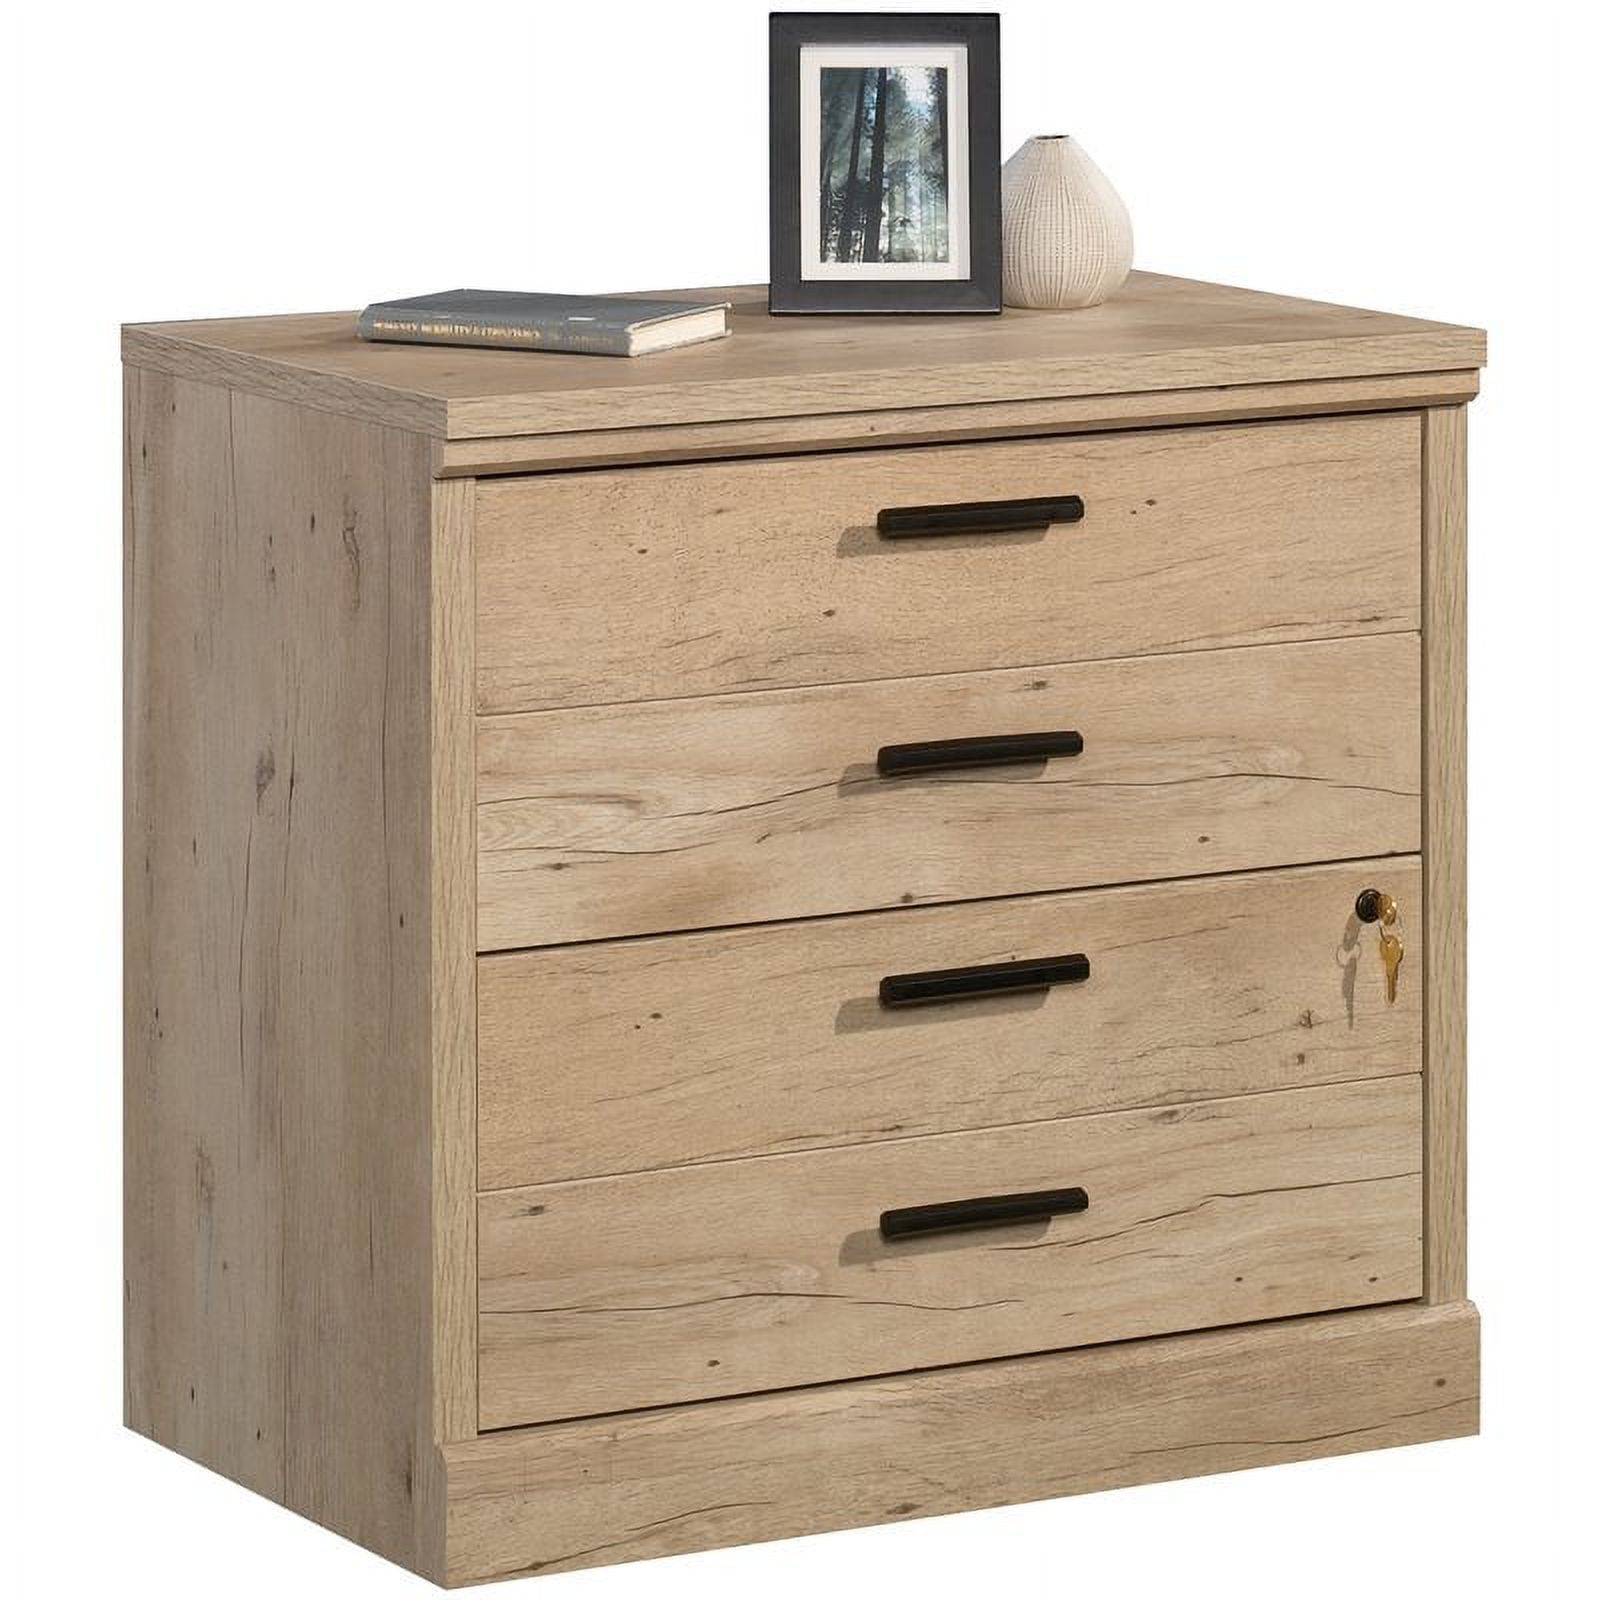 UrbanPro 2-Drawer Modern Engineered Wood Lateral File Cabinet in Prime Oak - image 4 of 10